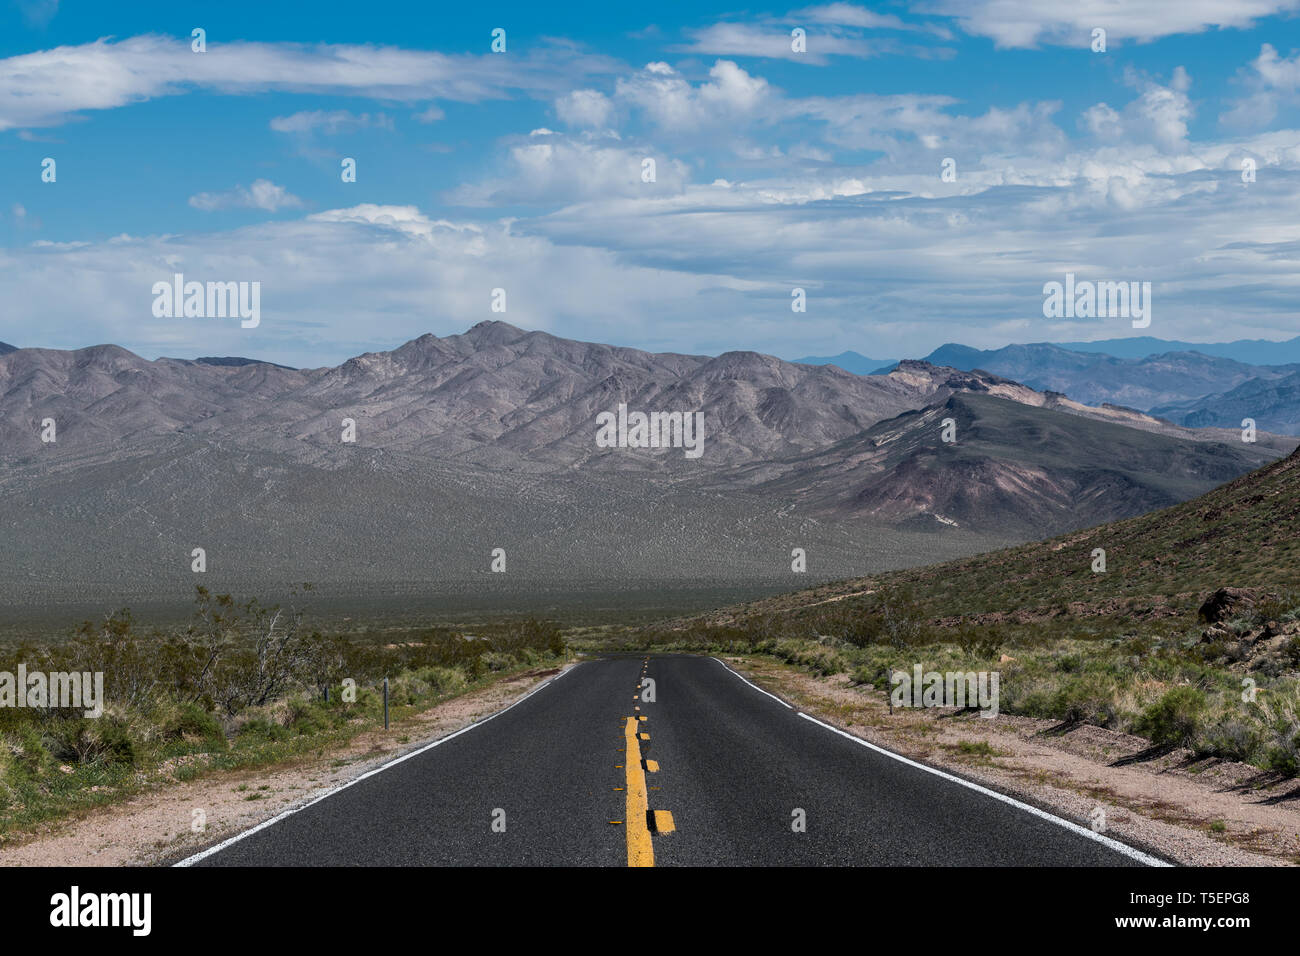 A highway moving towards perspective toward a mountain range in the desert landscape of Death Valley National Park Stock Photo